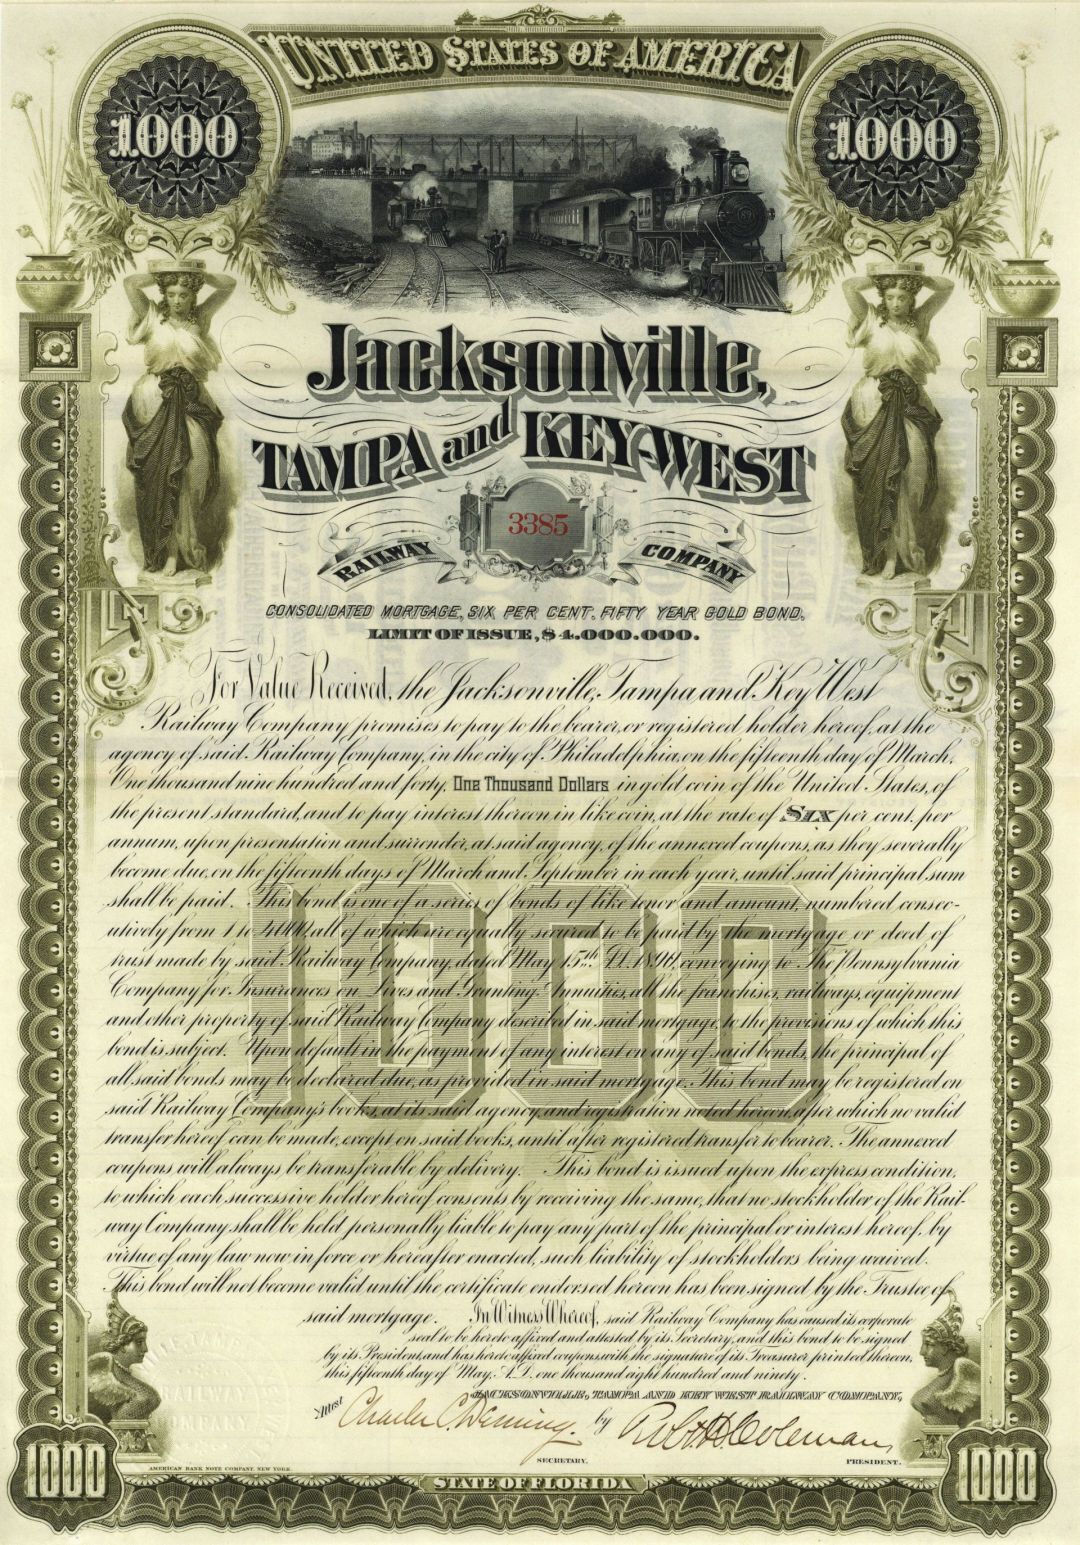 Jacksonville, Tampa and Key-West Railway - 1890 dated $1,000 6% 50 Year Gold Bon